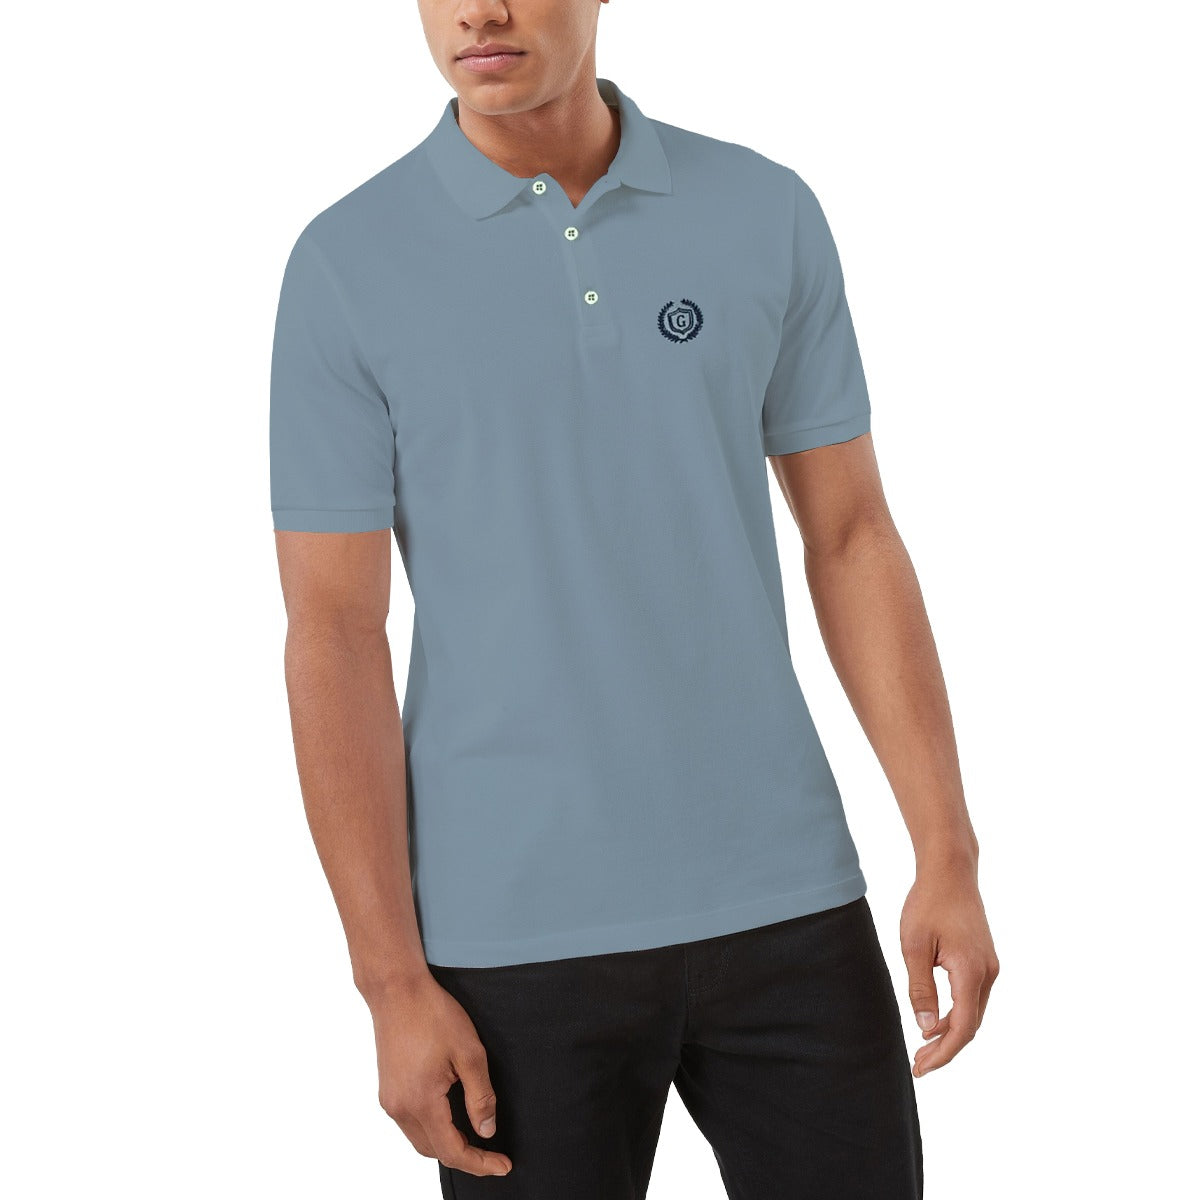 HG Signature Embroidered Solid Polo Shirt